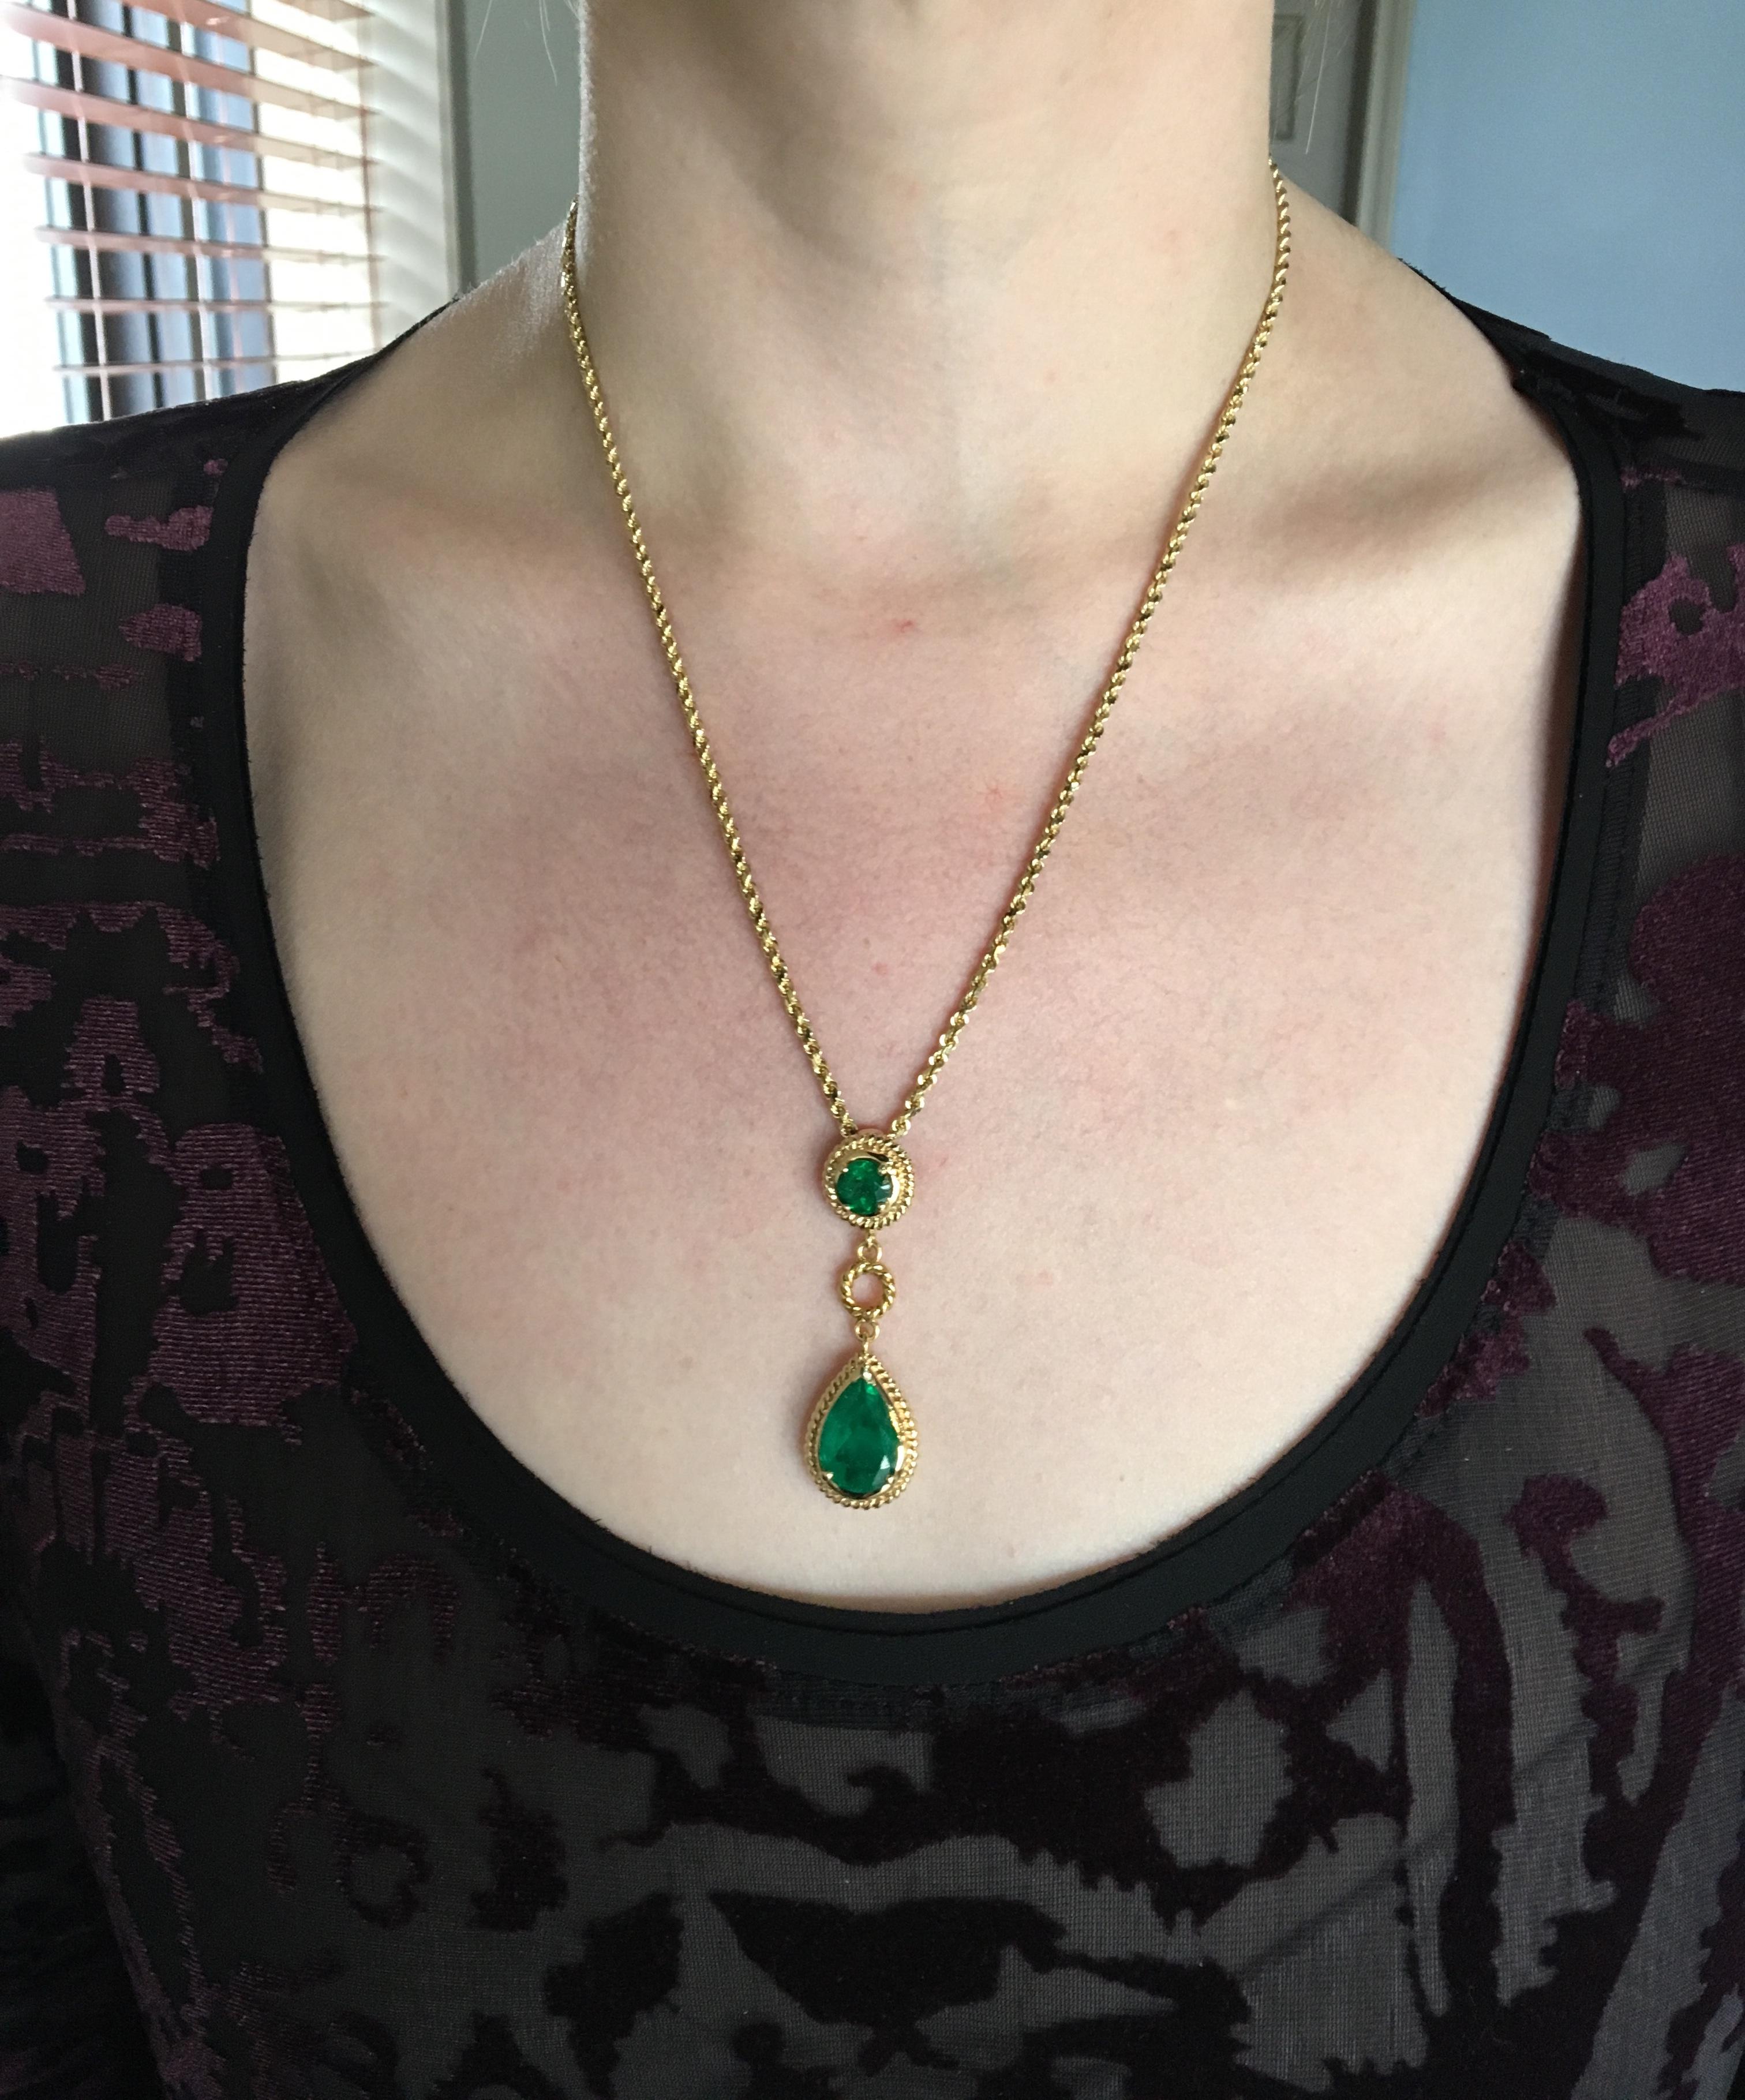 14K Yellow Gold necklace features a two emeralds in a rope like design. The pear cut emerald measures approximately 10.39MM X 14.50MM. The Round emerald measures approximately 7.11MM.  These beautiful emeralds have a vibrant green color.  Like most